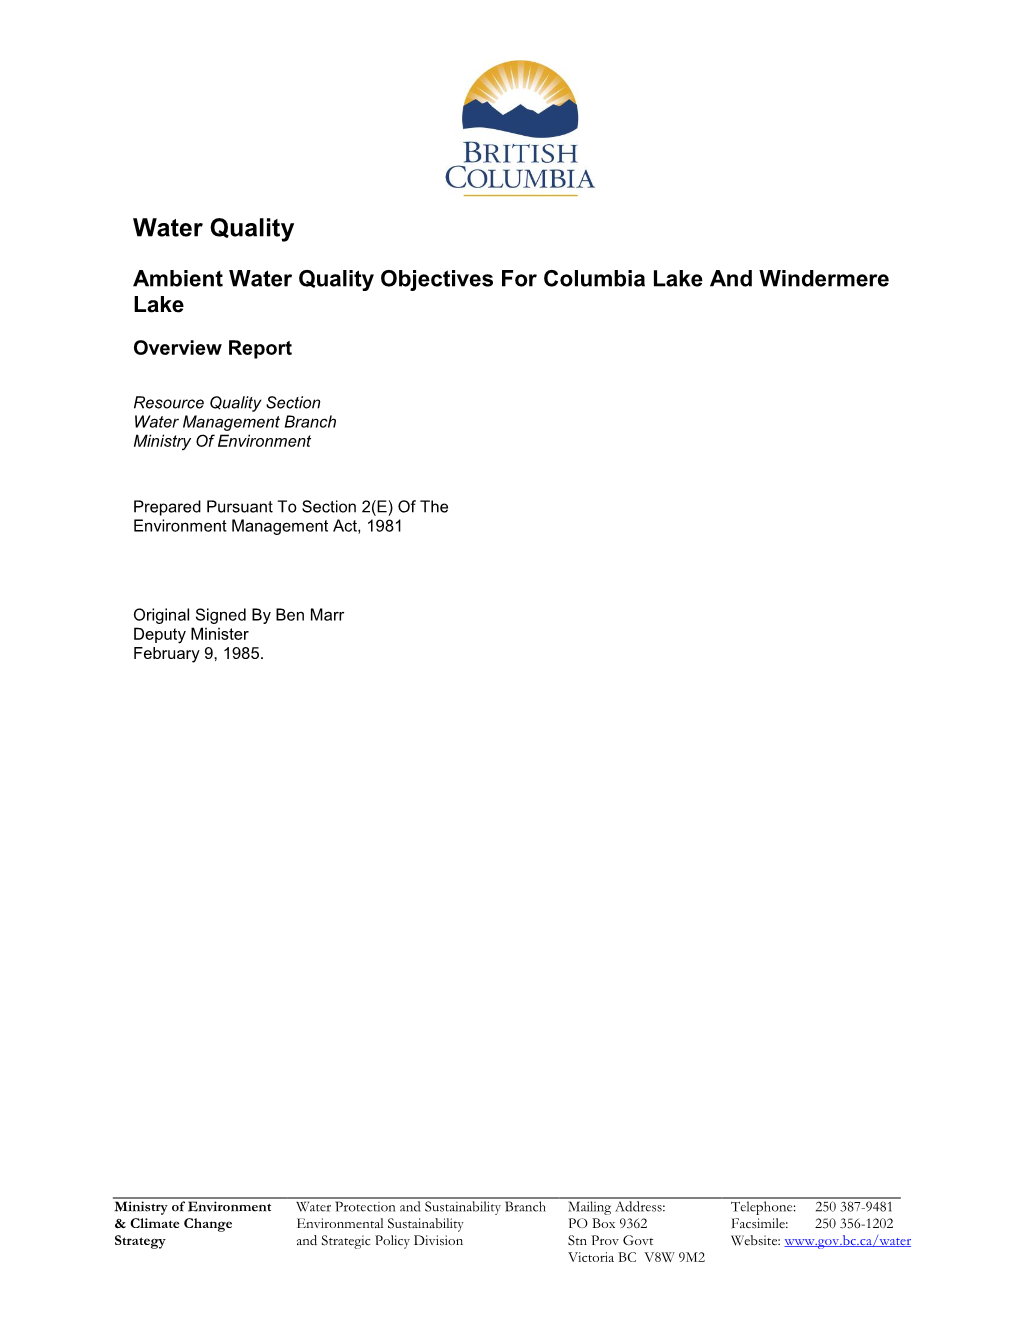 Ambient Water Quality Objectives for Columbia Lake and Windermere Lake